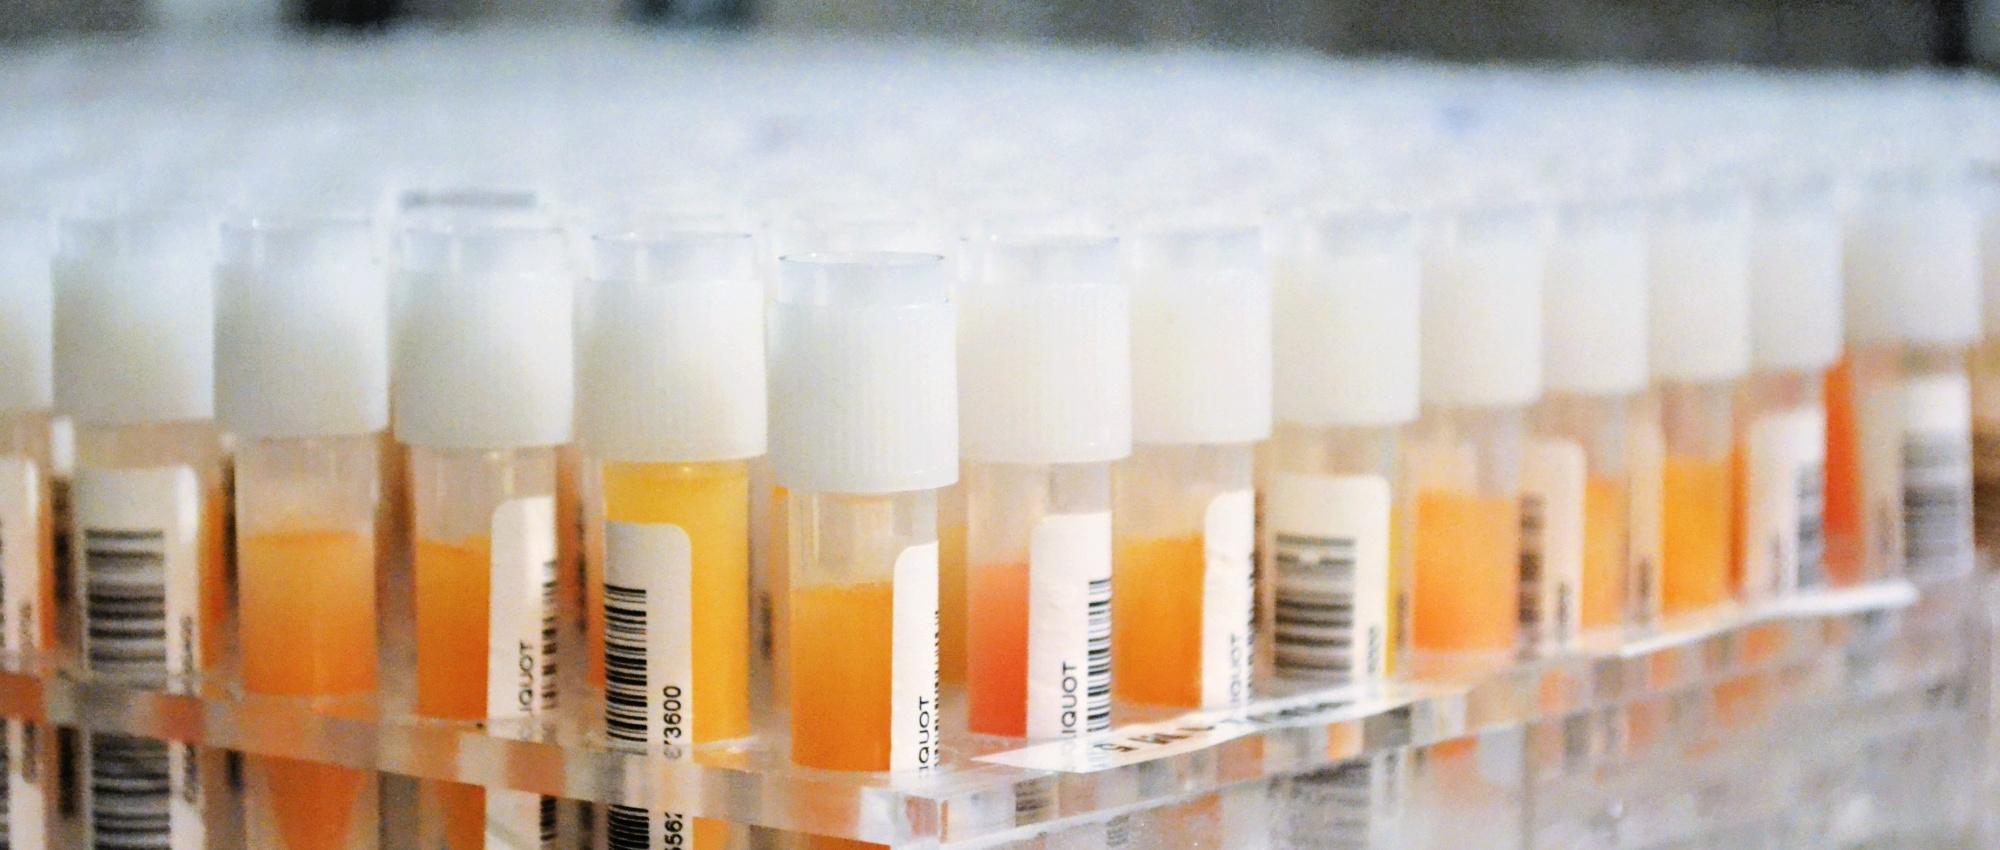 Image of vials of plasma being prepared for testing with orange substance in the tubes.